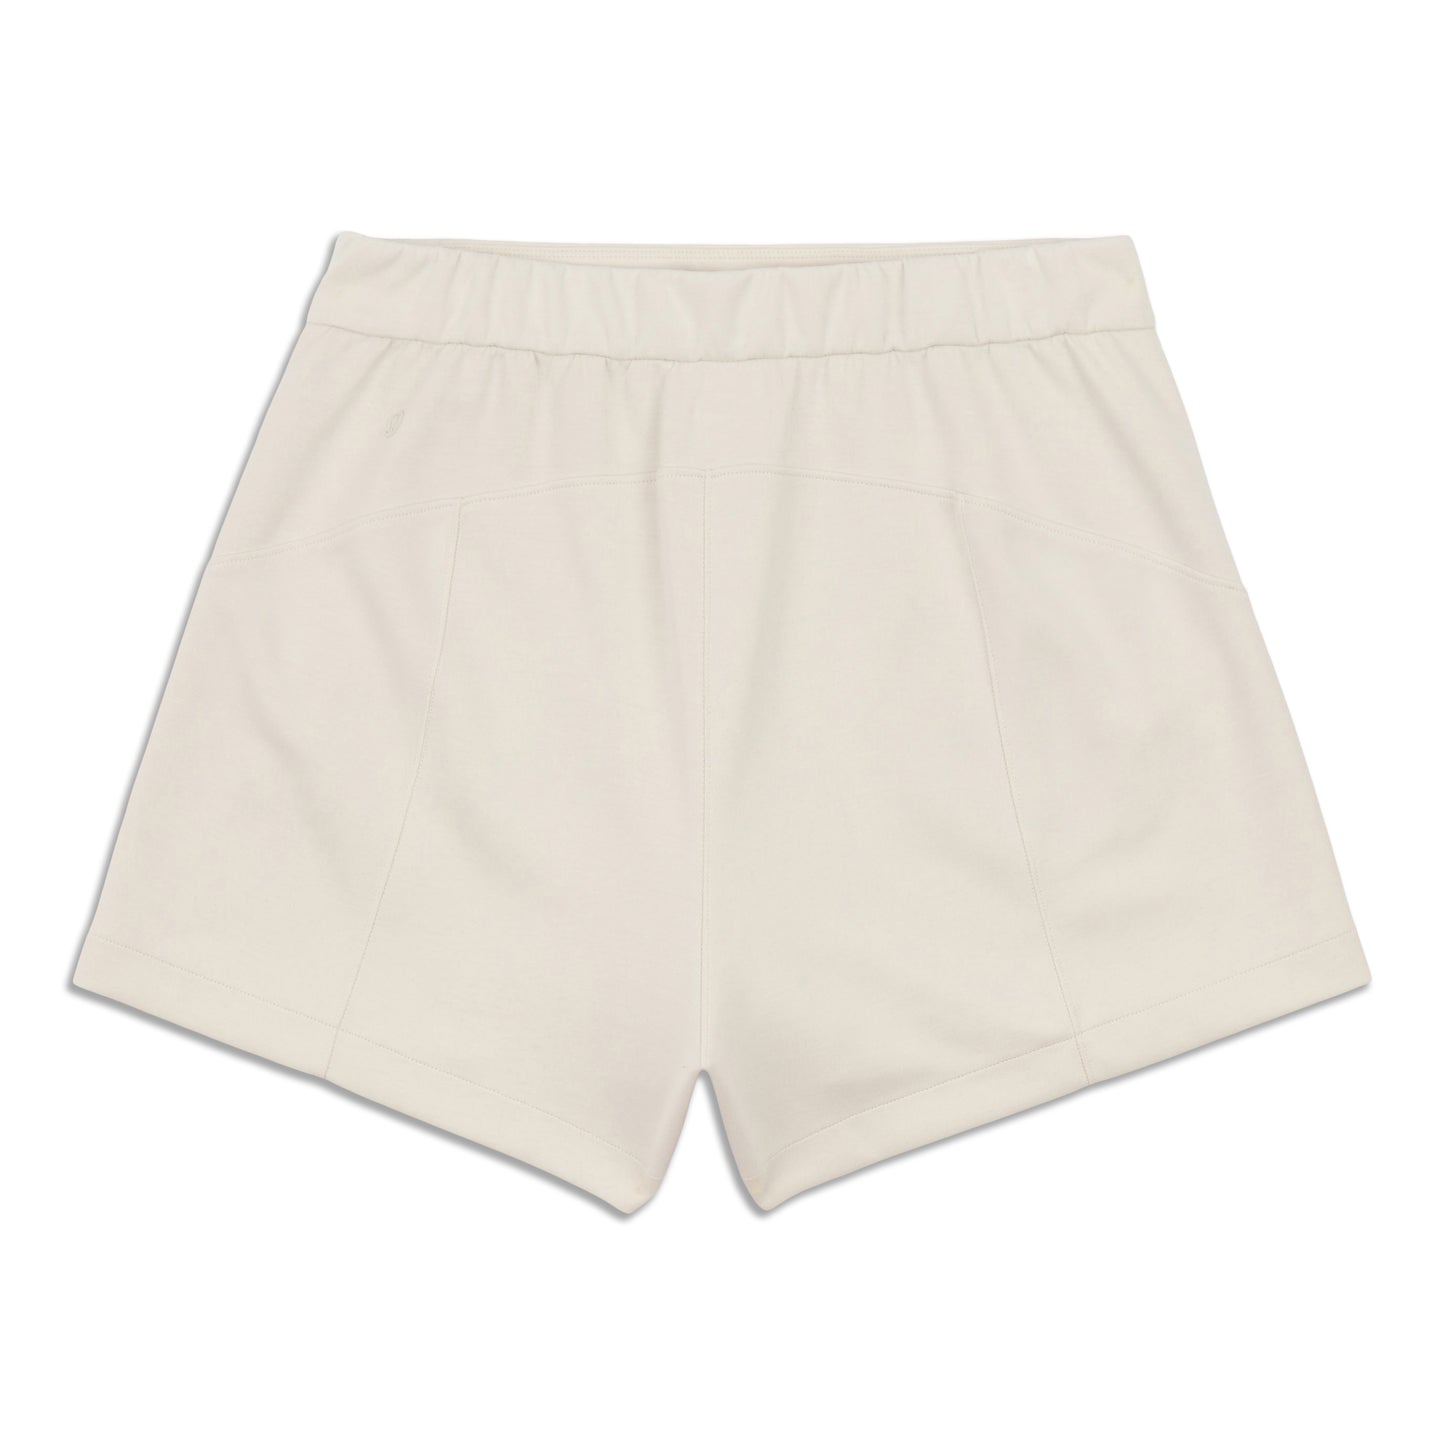 Softstreme Relaxed Short